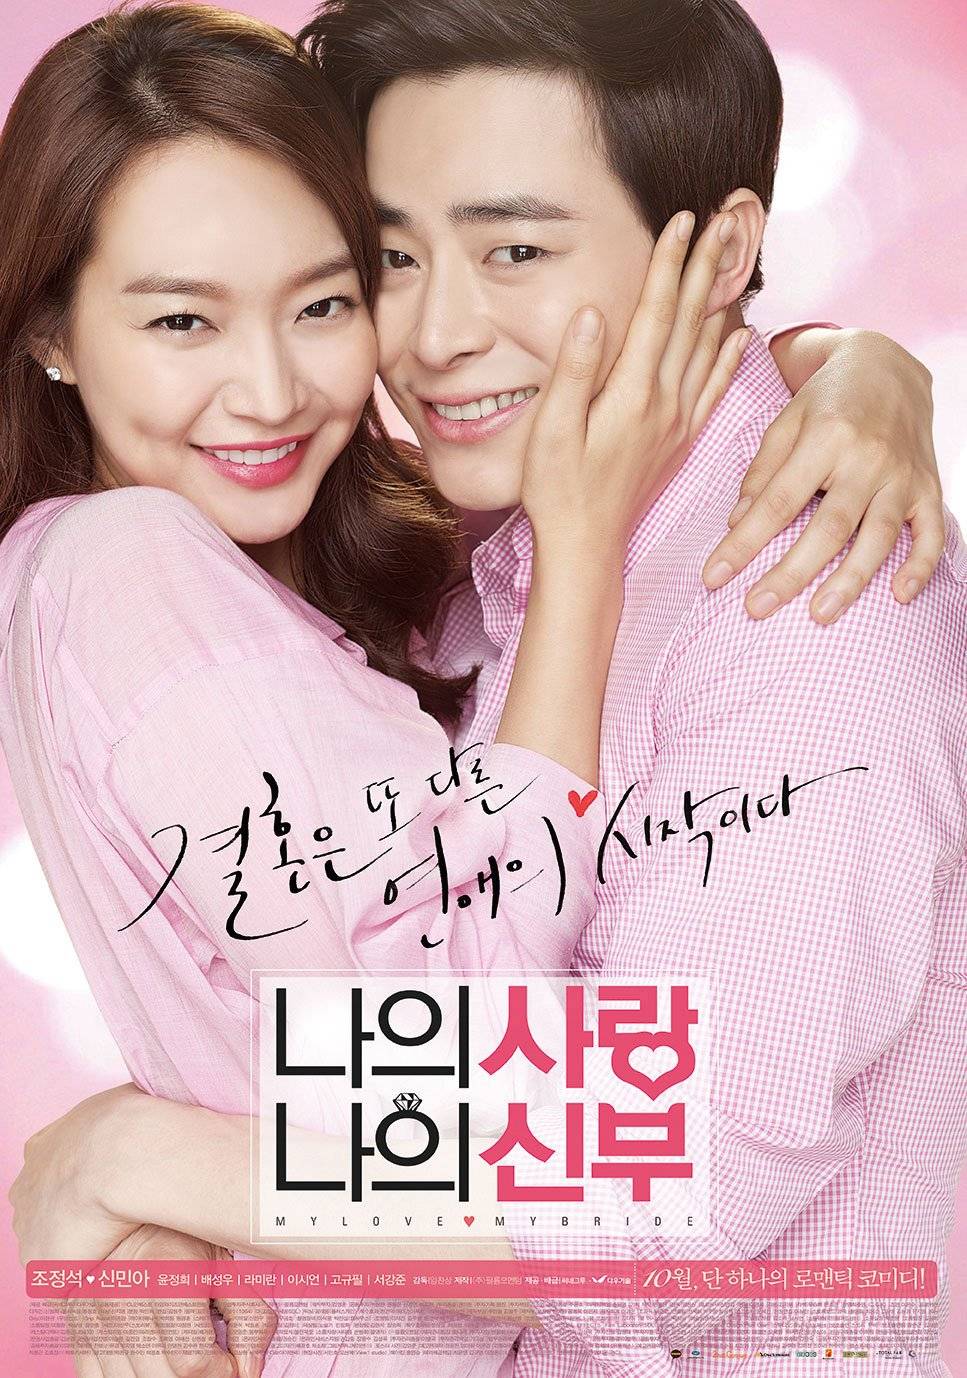 [Video] Added new posters and videos for the Korean movie 'My Love, My